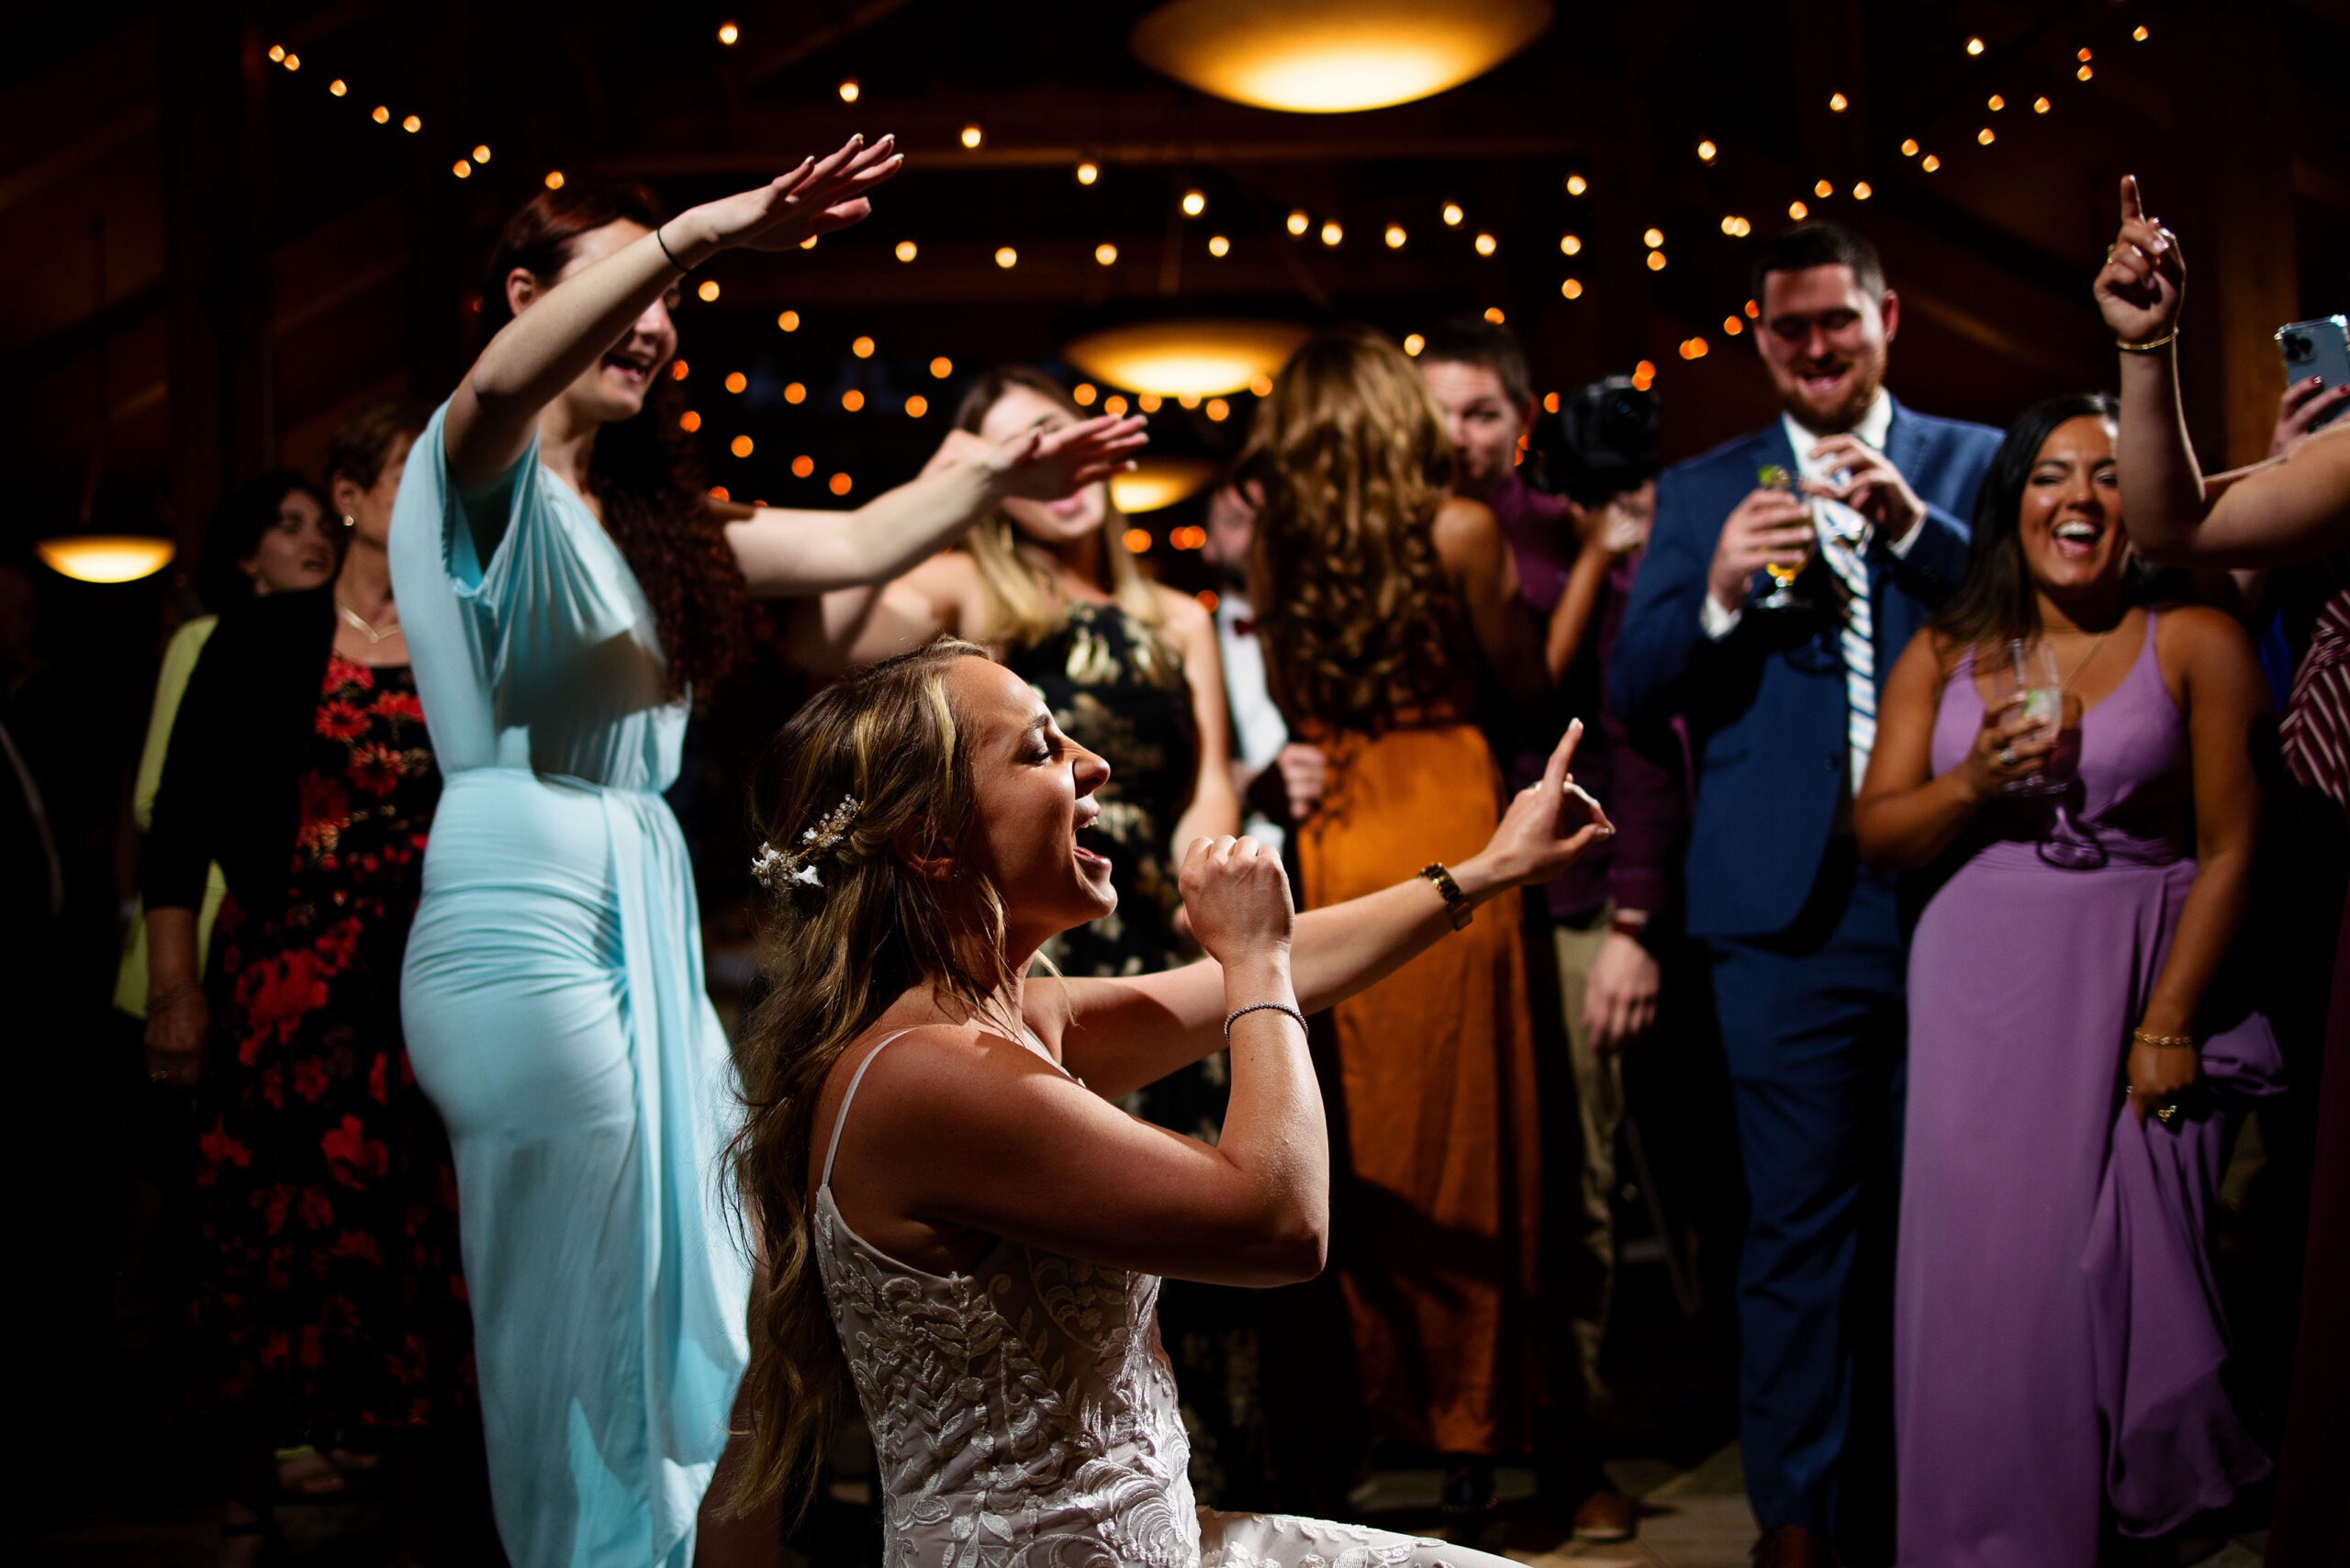 Guests dance during a wedding reception at Black Mountain Lodge